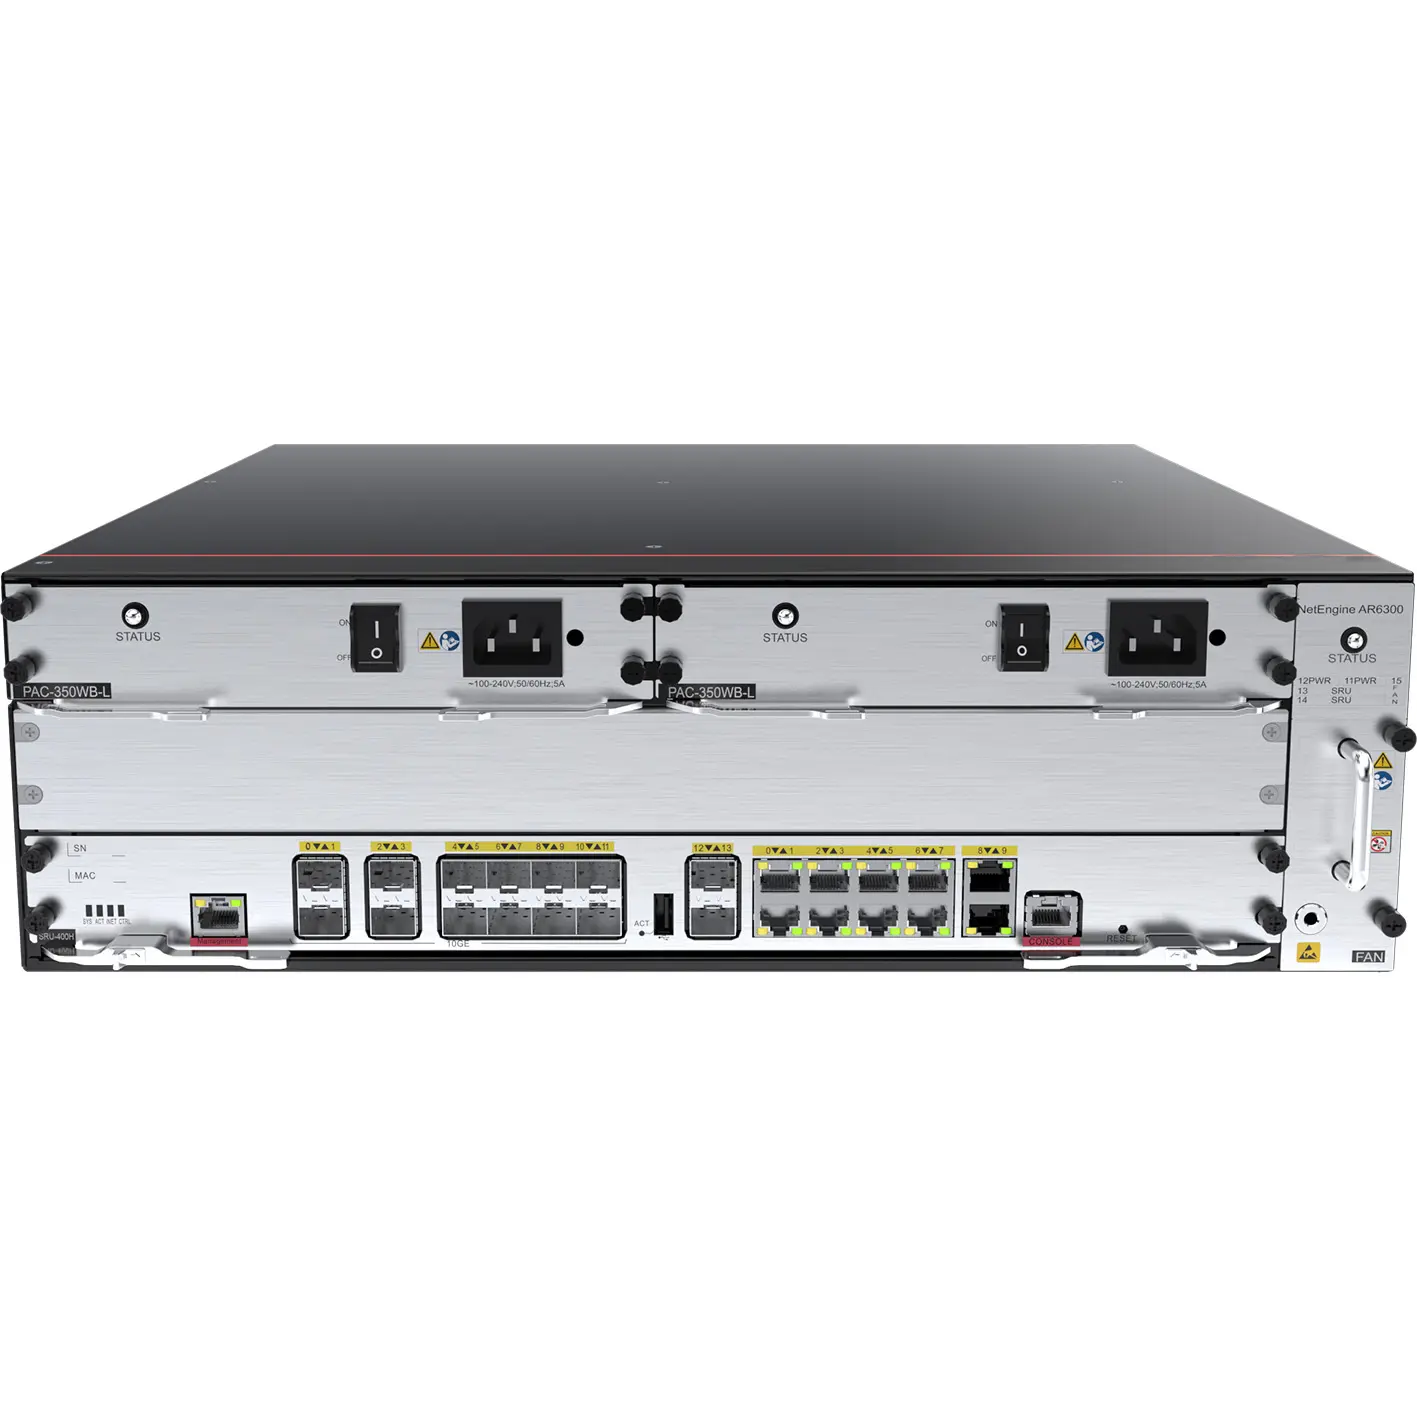 Brand New NE AR6300 Enterprise Router 2.4G/5G Wi-Fi Data VoIP Firewall VPN QoS Wired Encryption from AR6000 Series